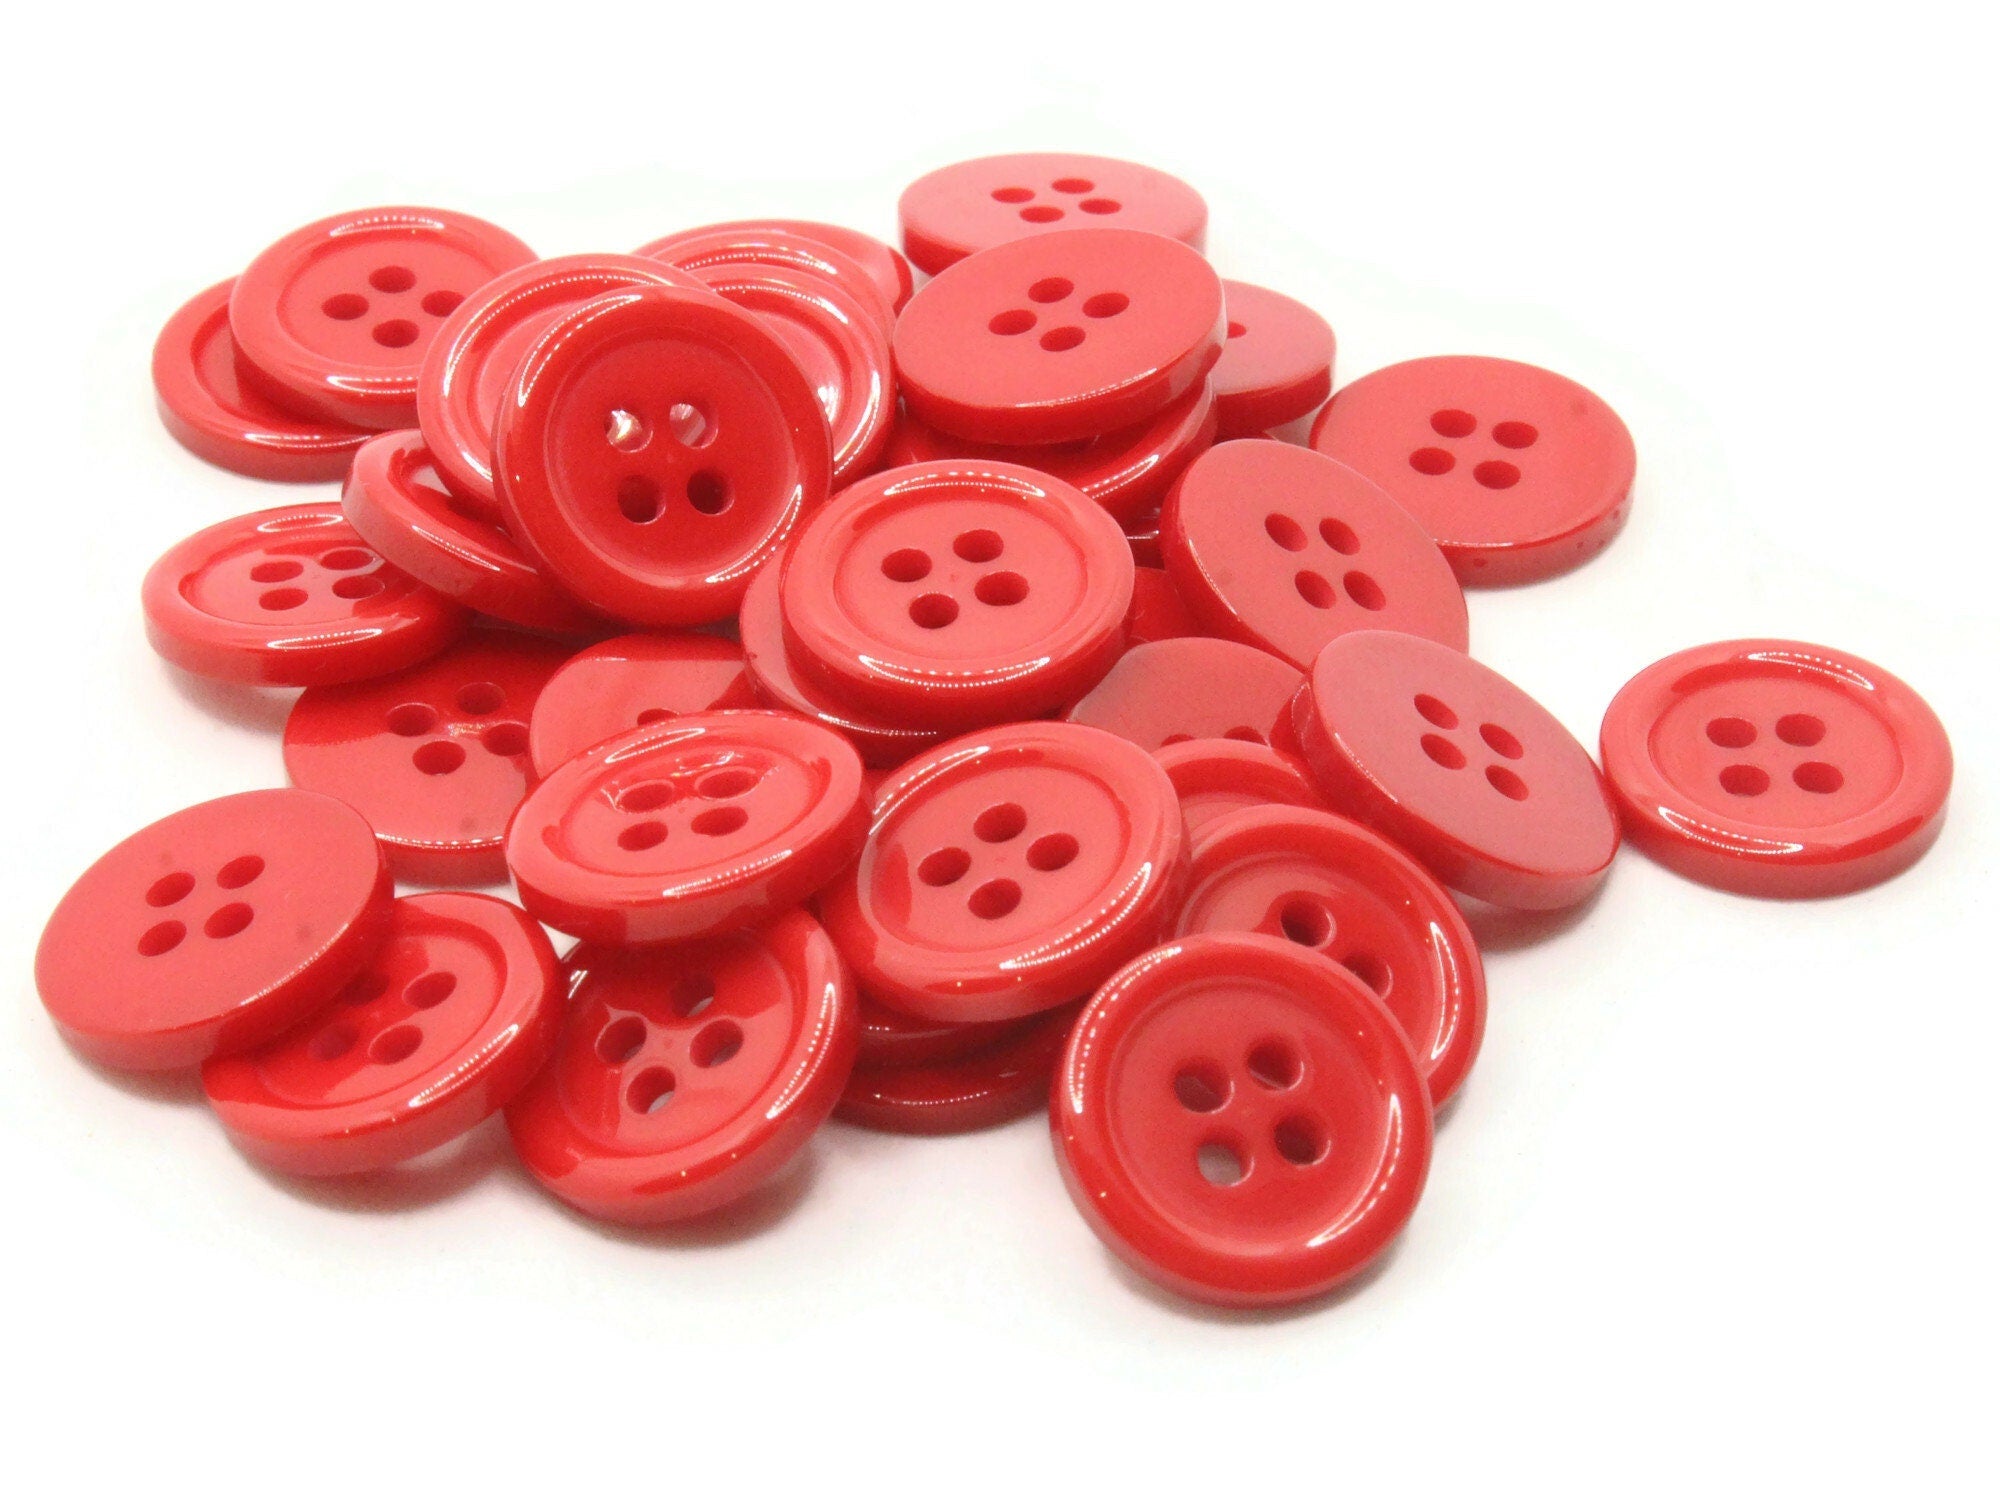 VTG Mixed size lot of Red color Fun 55 pc Plastic Sewing Buttons